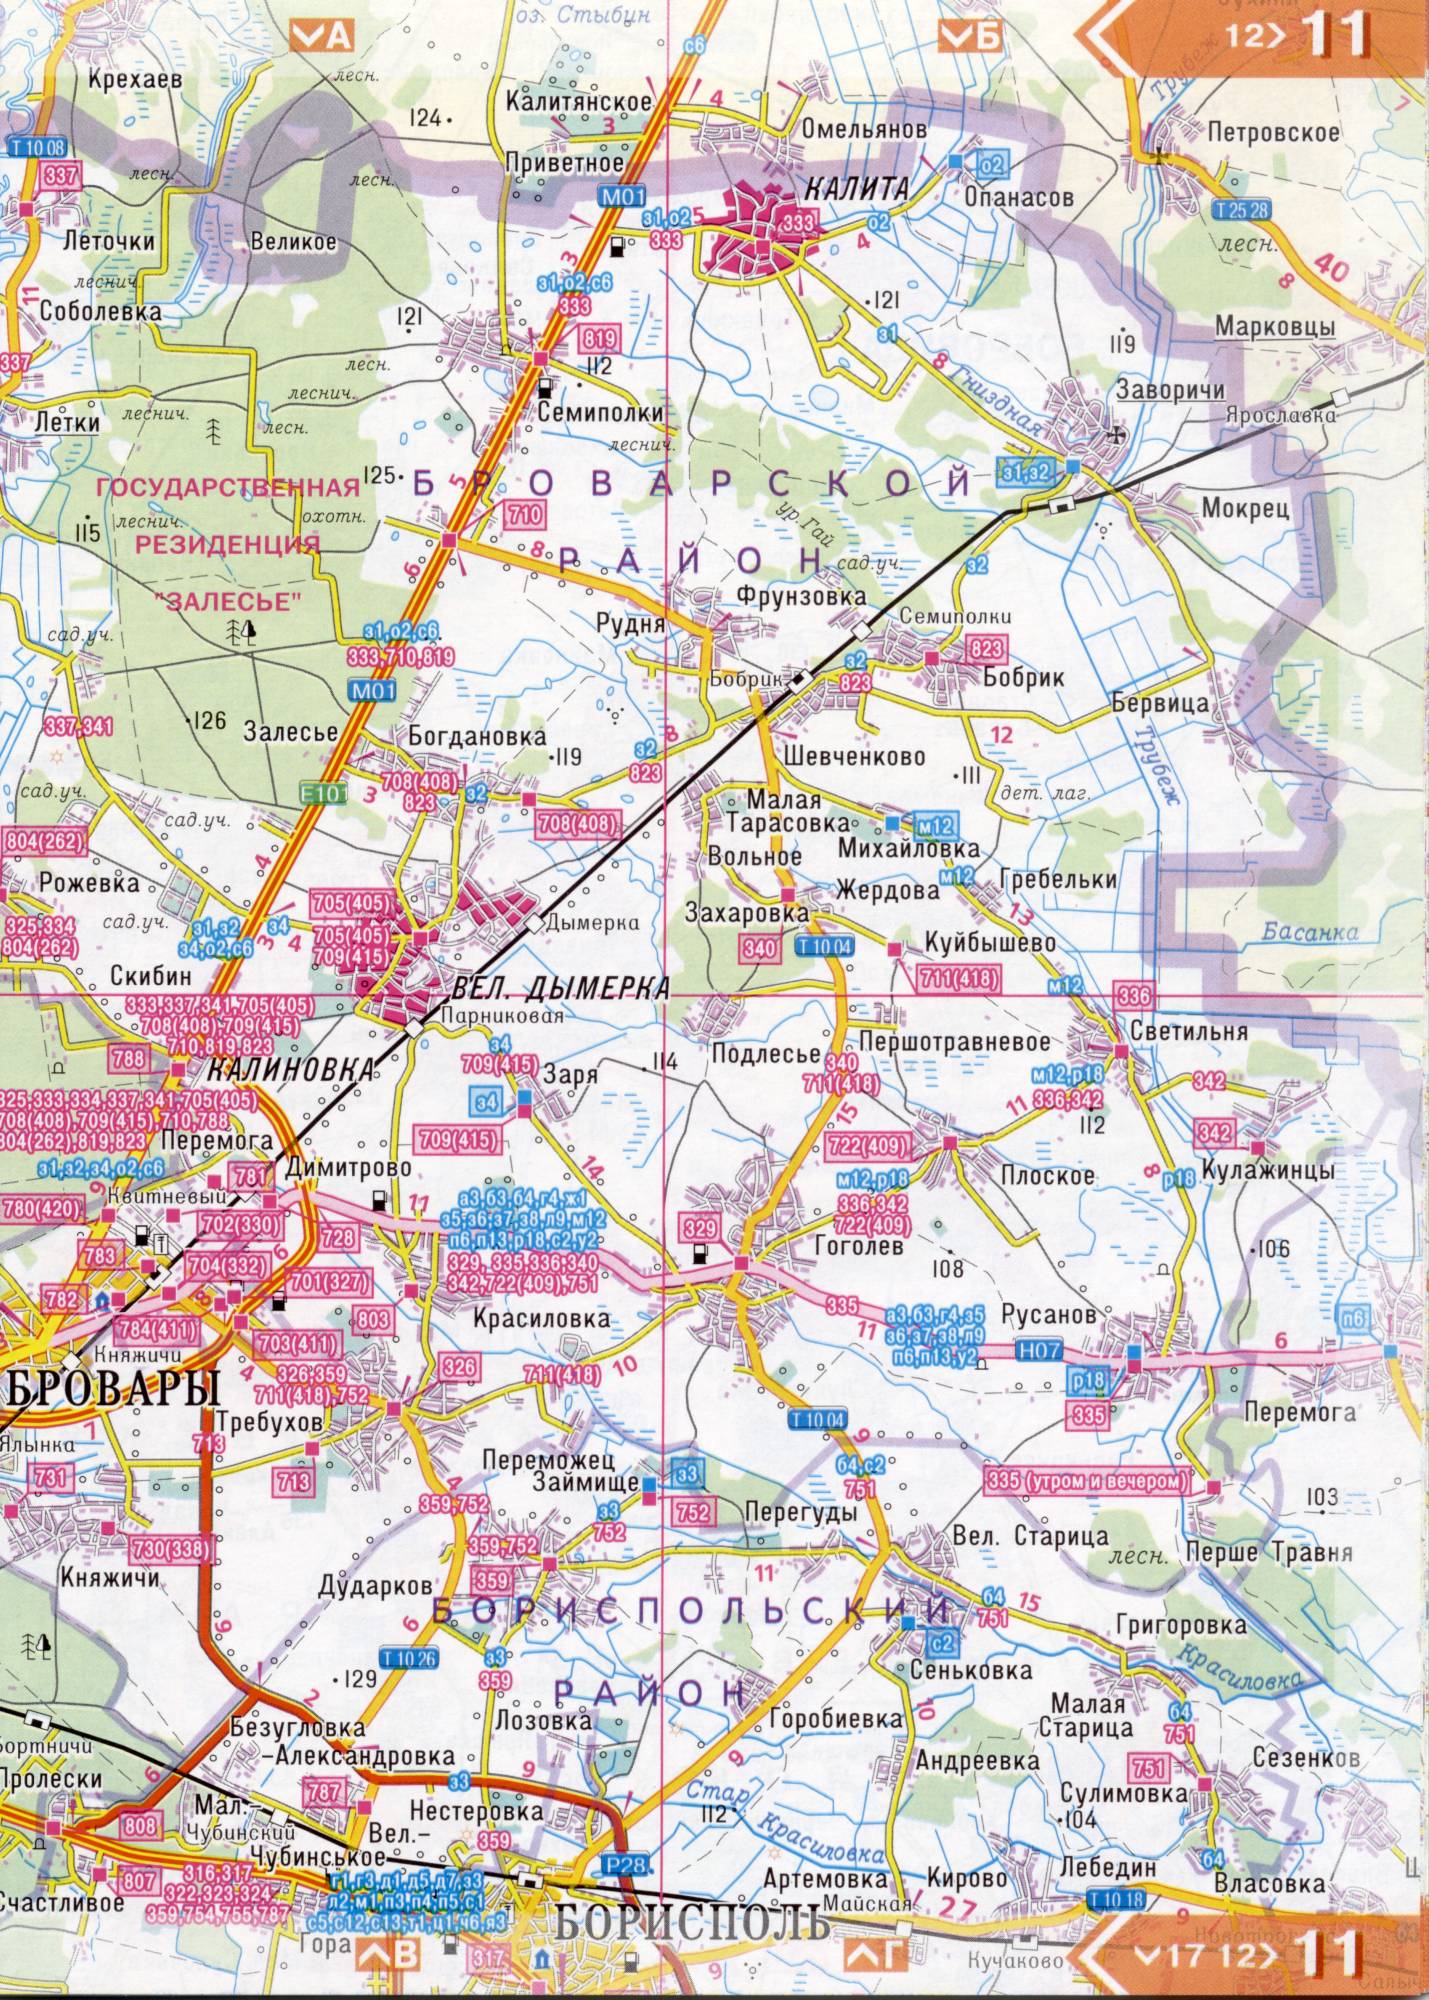 Atlas of the Kiev region. Detailed map of the Kiev region from the road atlas. Kiev region on a detailed map of scale 1cm = 3km. Free Download, D2